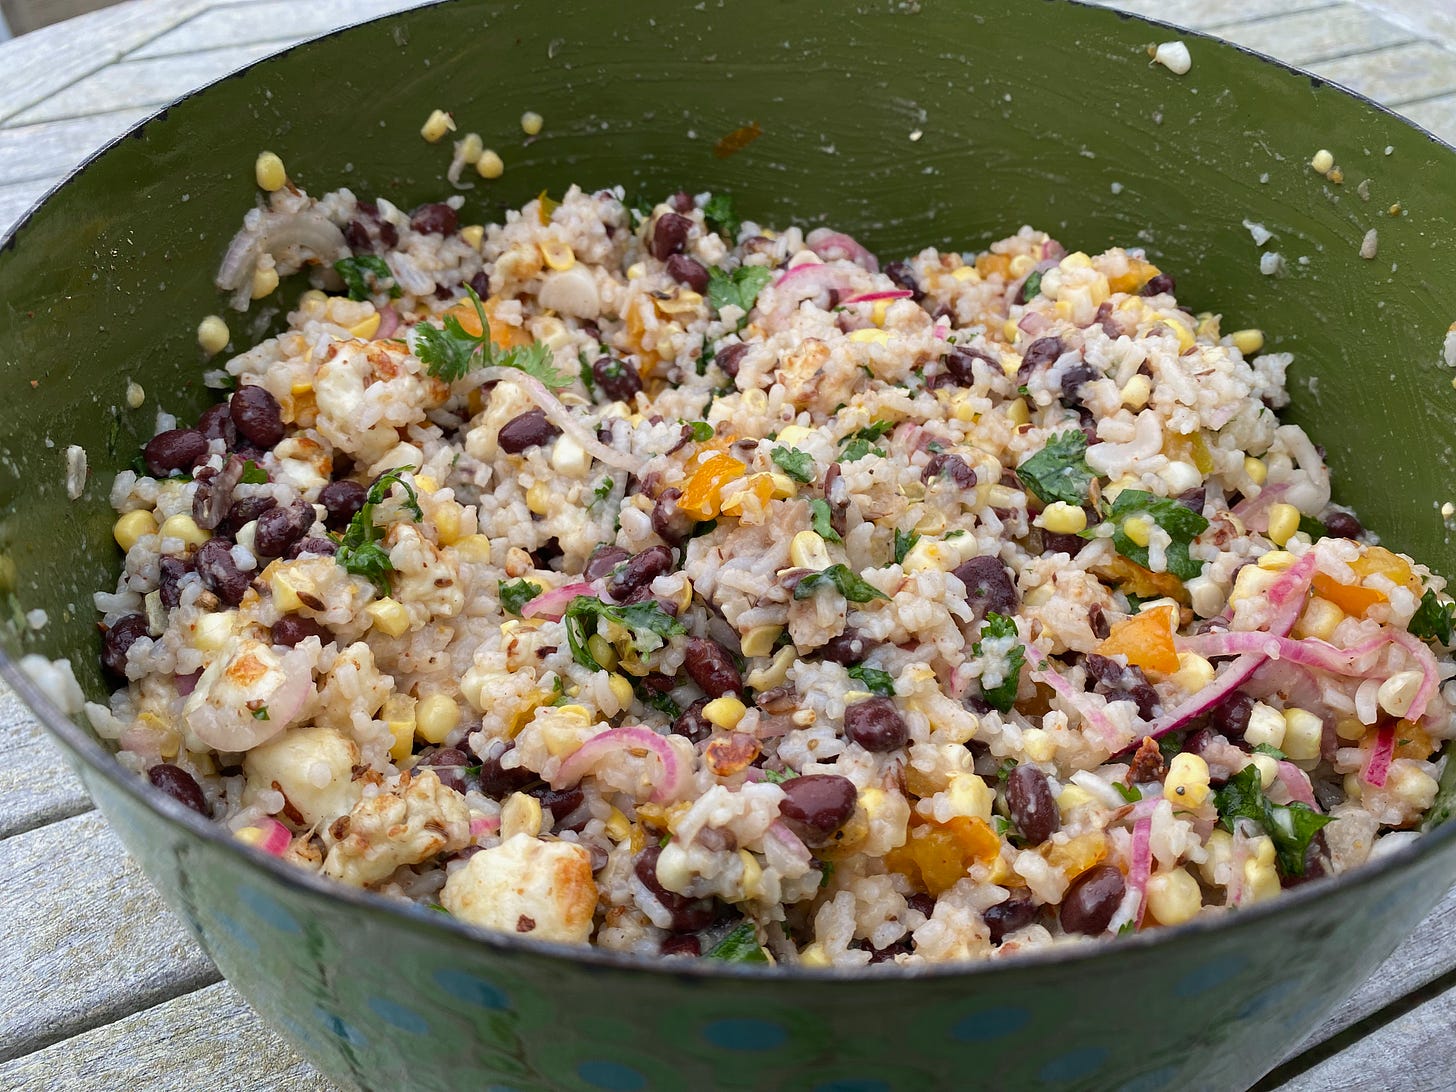 A large green bowl of rice and black bean salad.